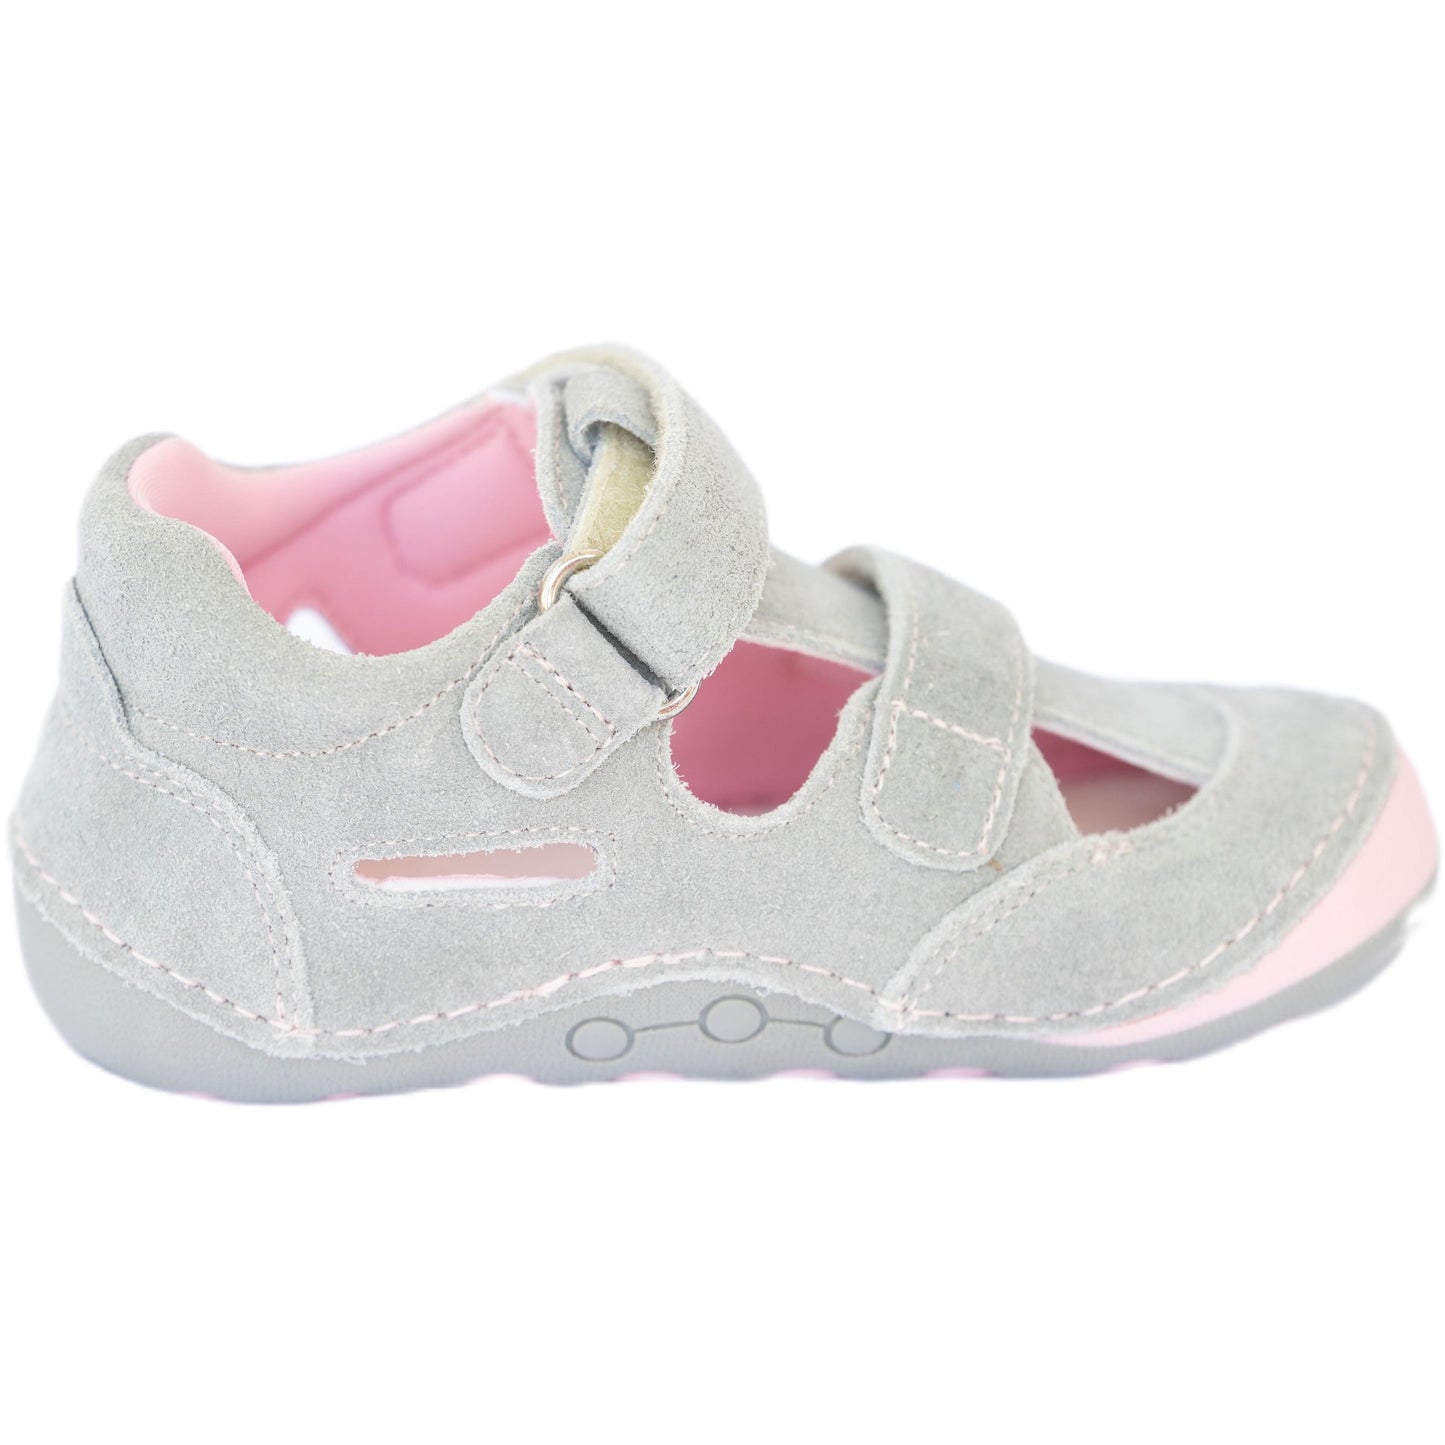 FLIP gris toddler girl barefoot sneaker is suitable for normal to wider foot. It has a beautiful design of light grey and pink colours. The sole and the heel counter are very flexible.